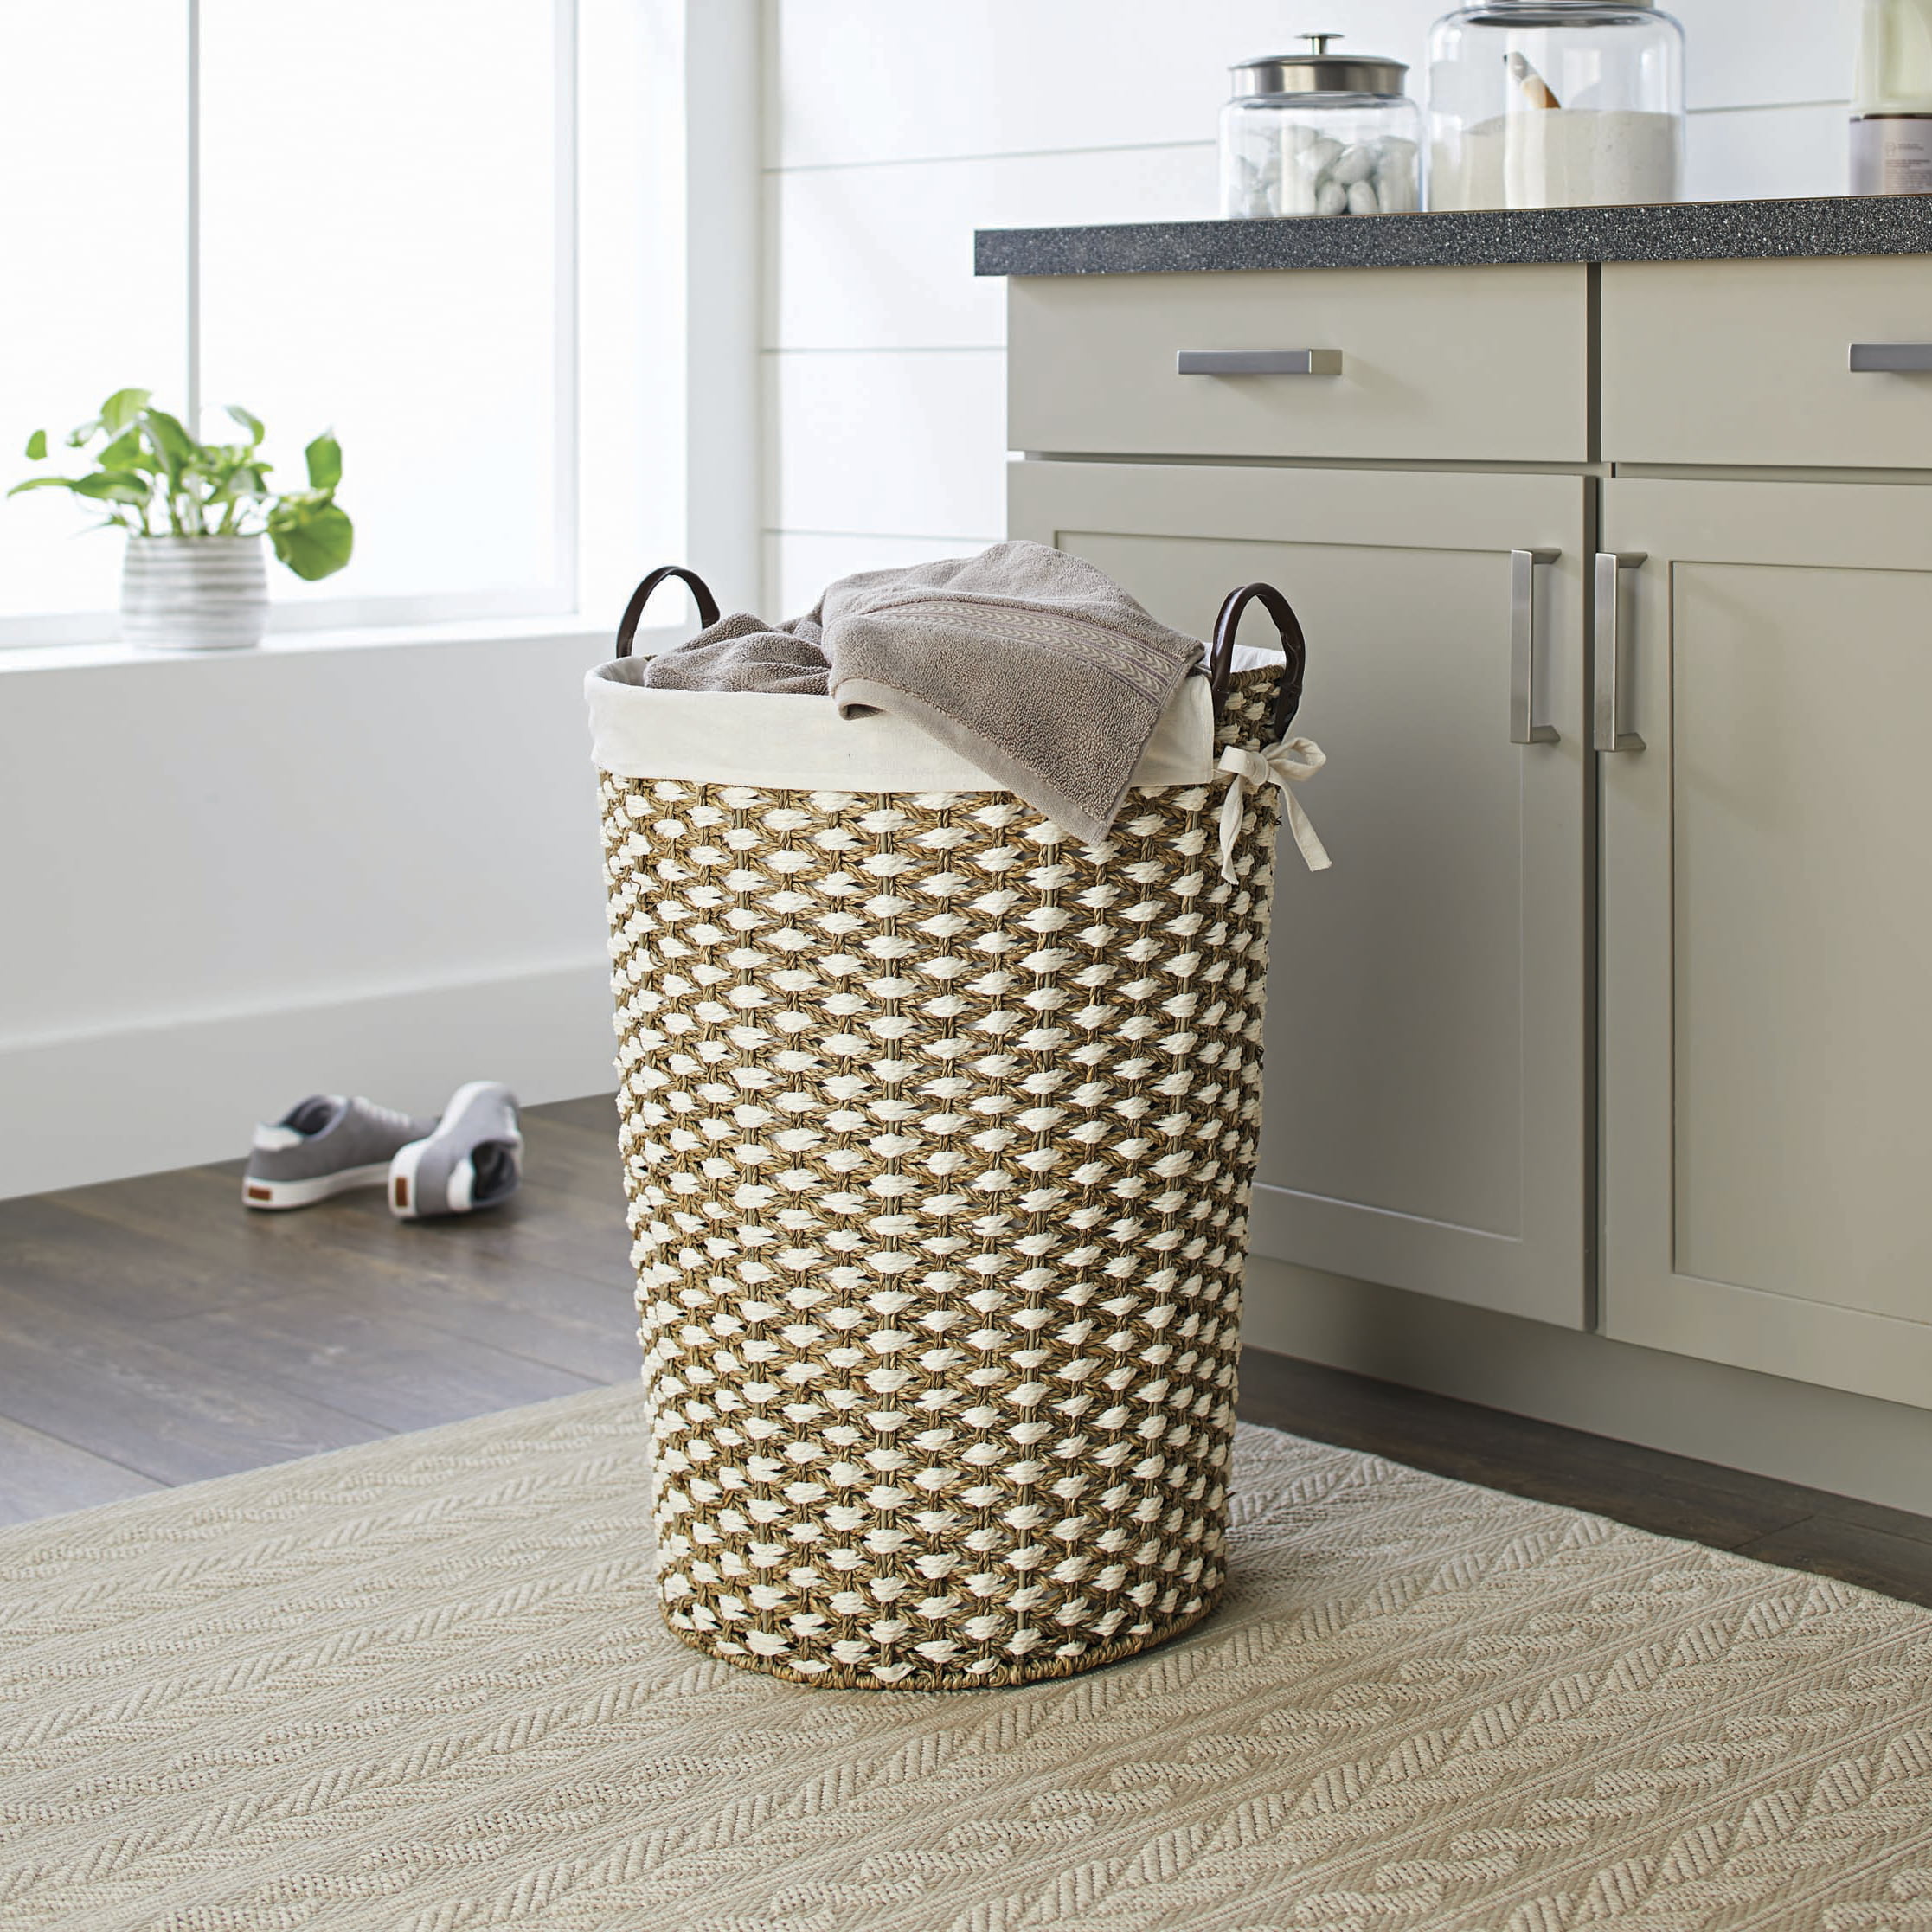 Better Homes & Gardens Woven Seagrass Hamper with Faux Leather Handles